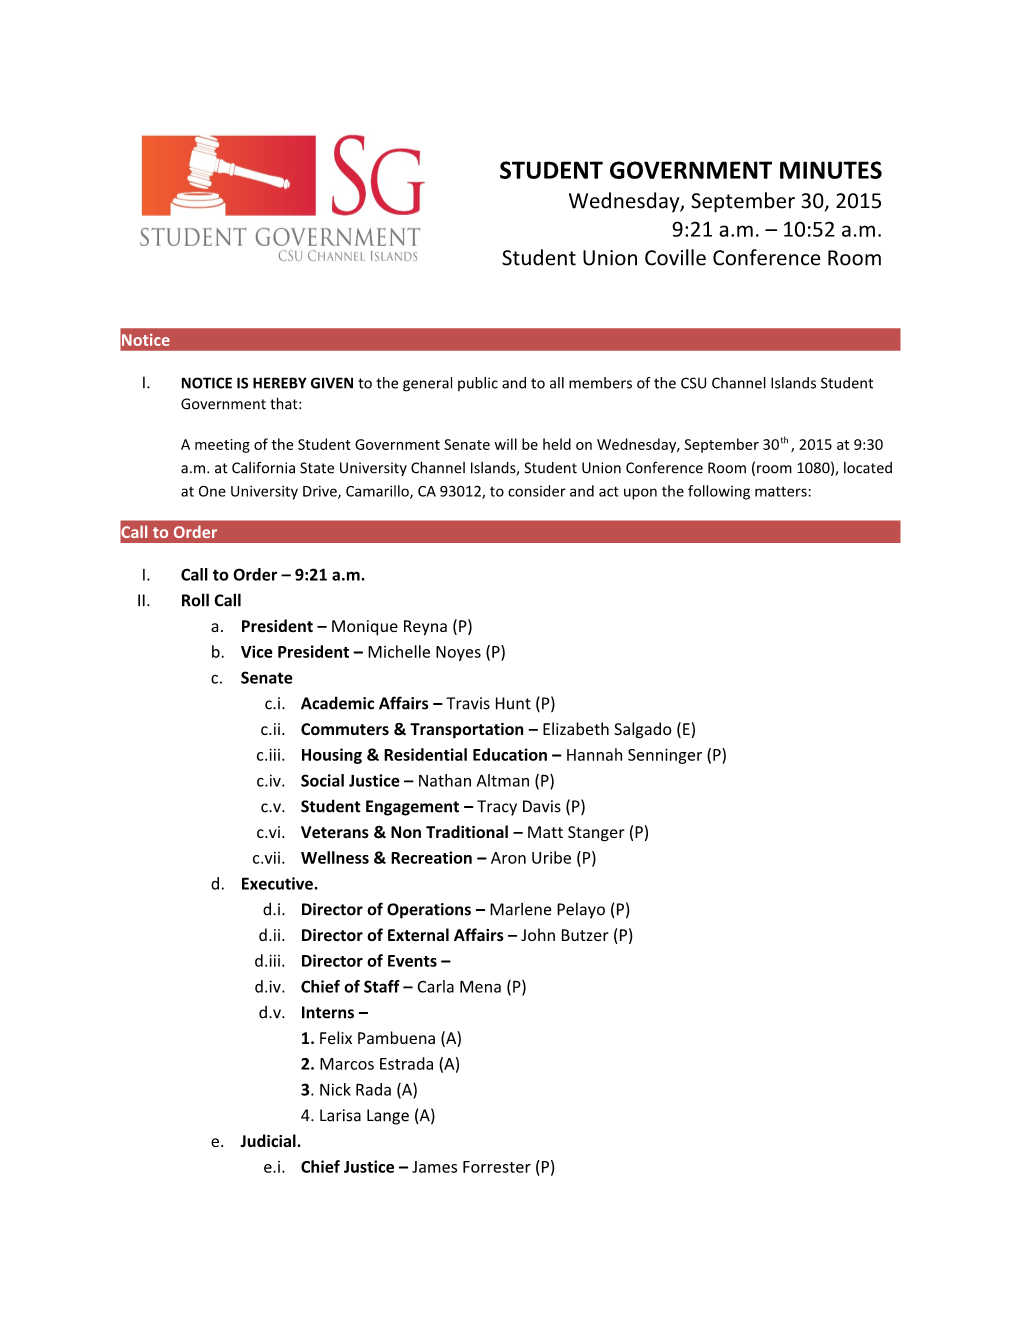 A Meeting of the Student Government Senate Will Be Held on Wednesday, September 30Th